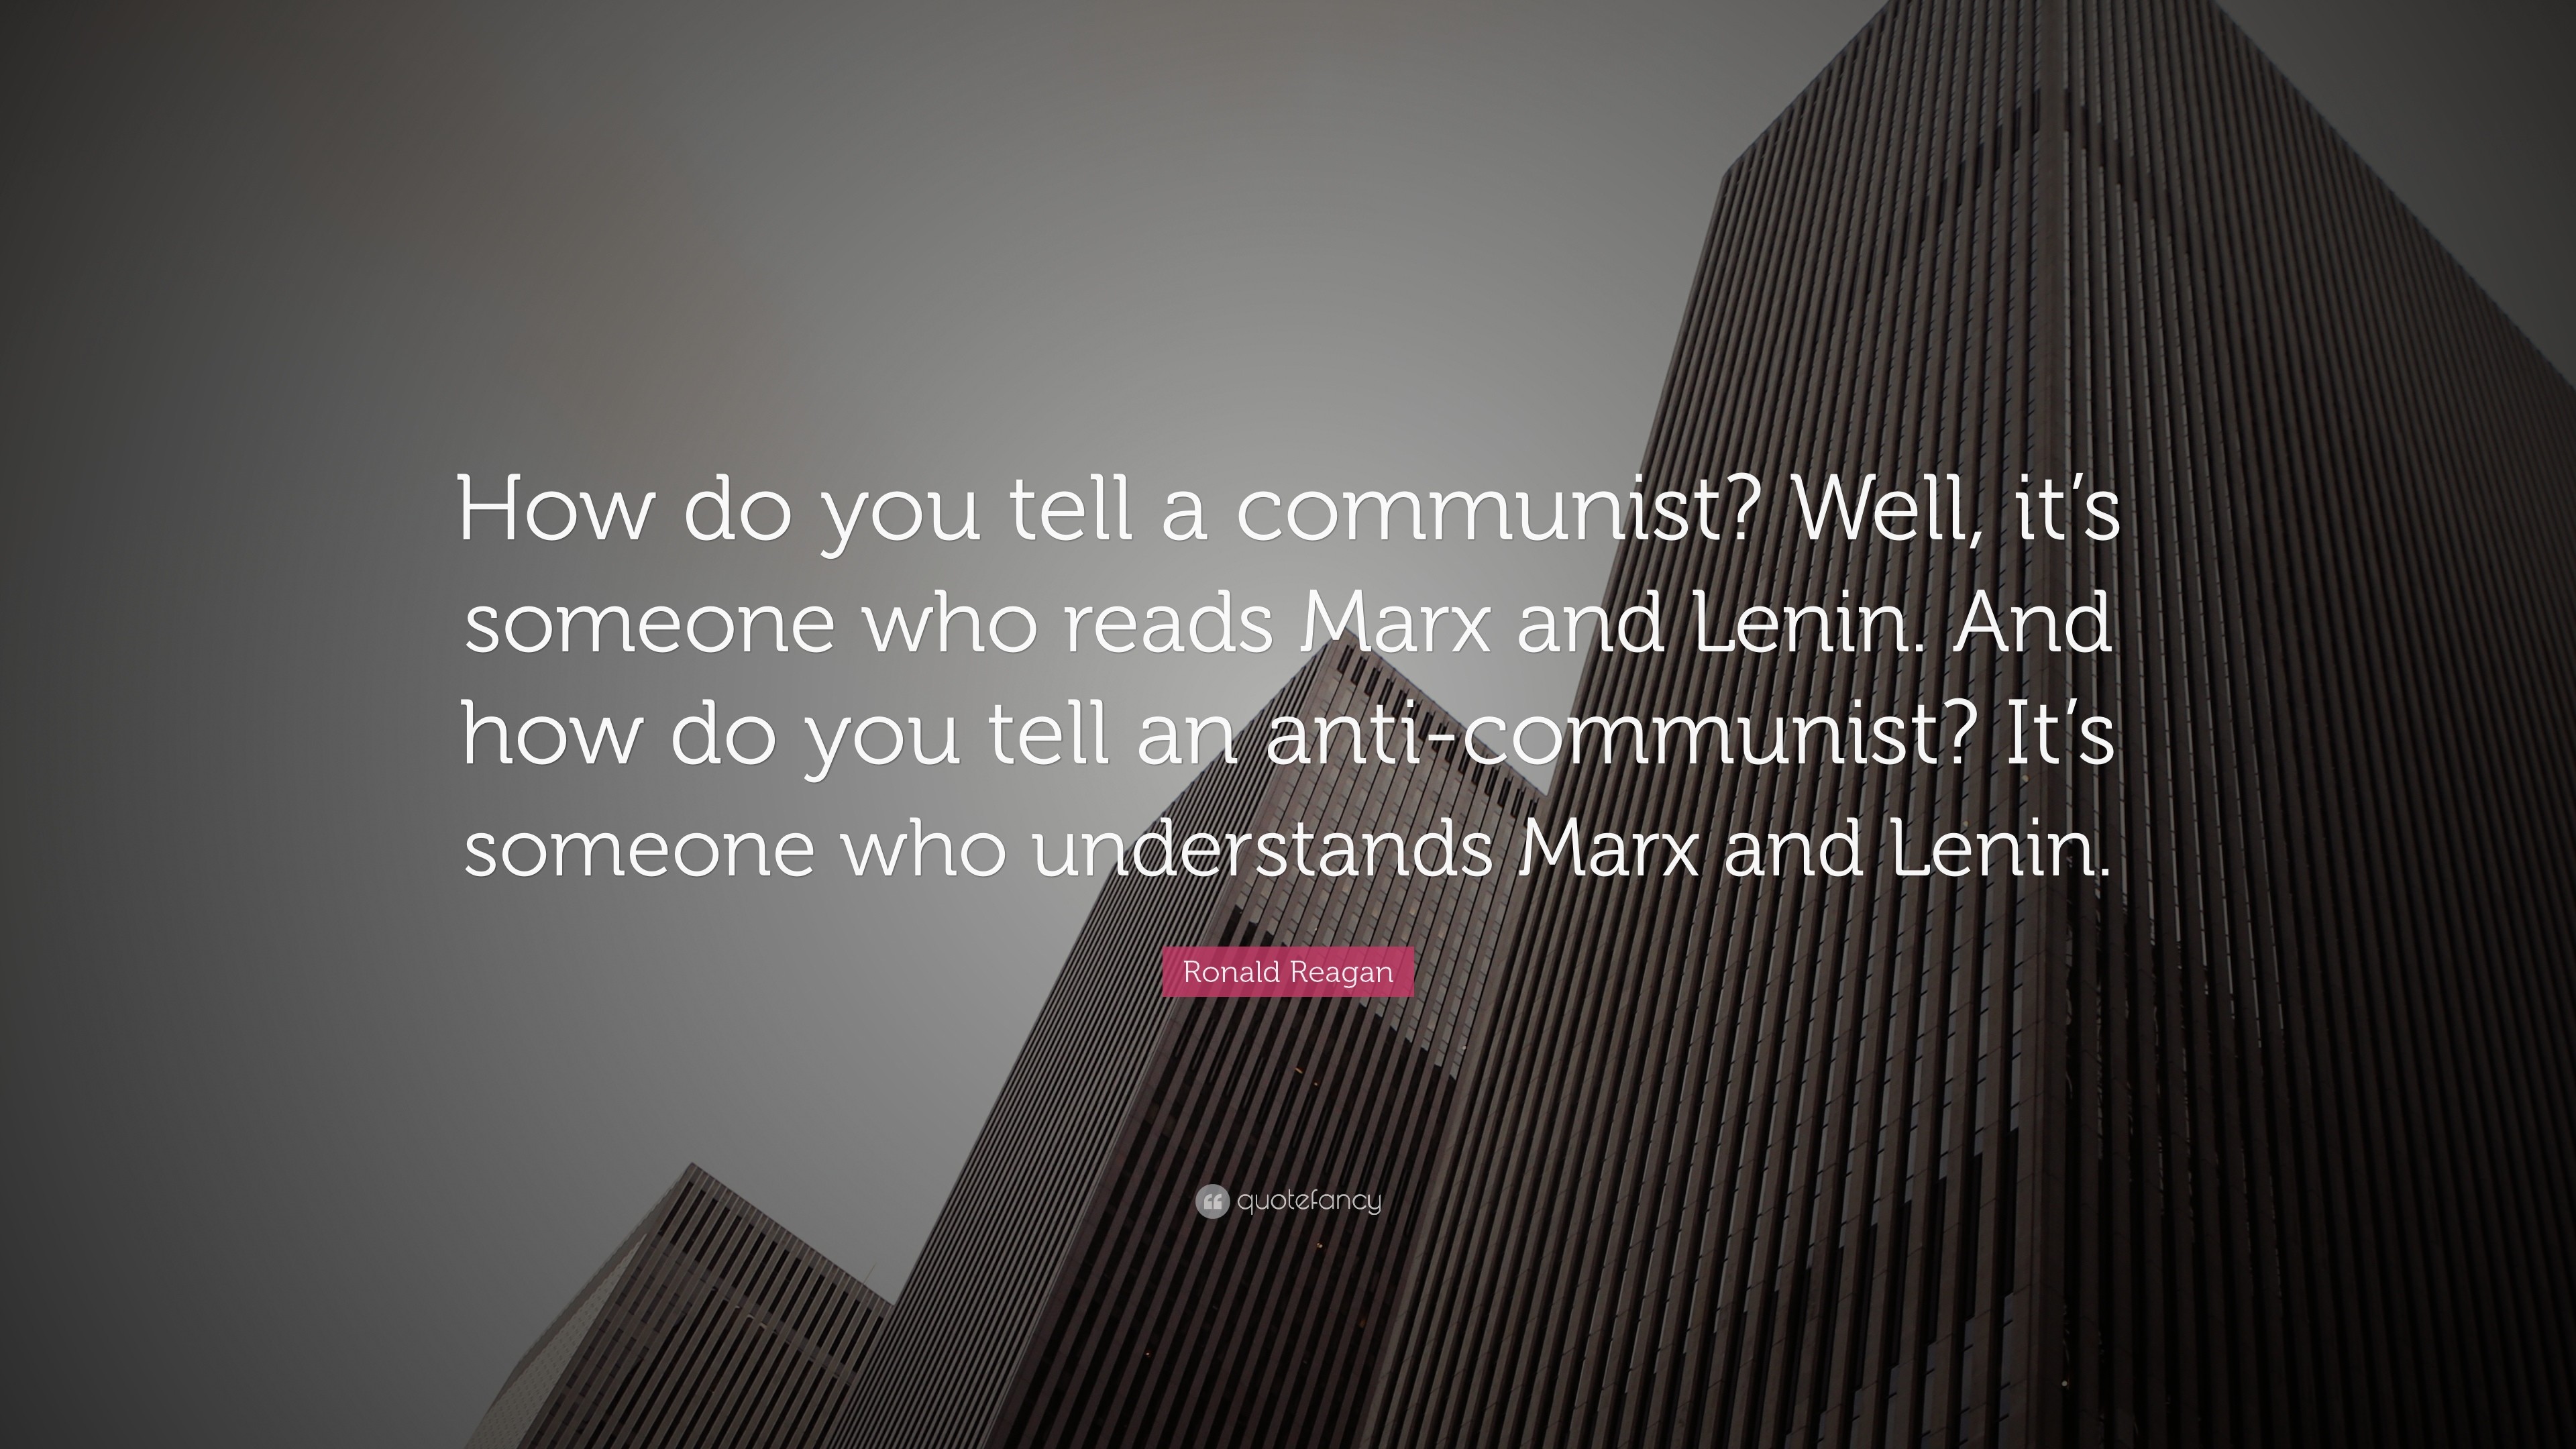 3840x2160 Ronald Reagan Quote: “How do you tell a communist? Well, it's someone